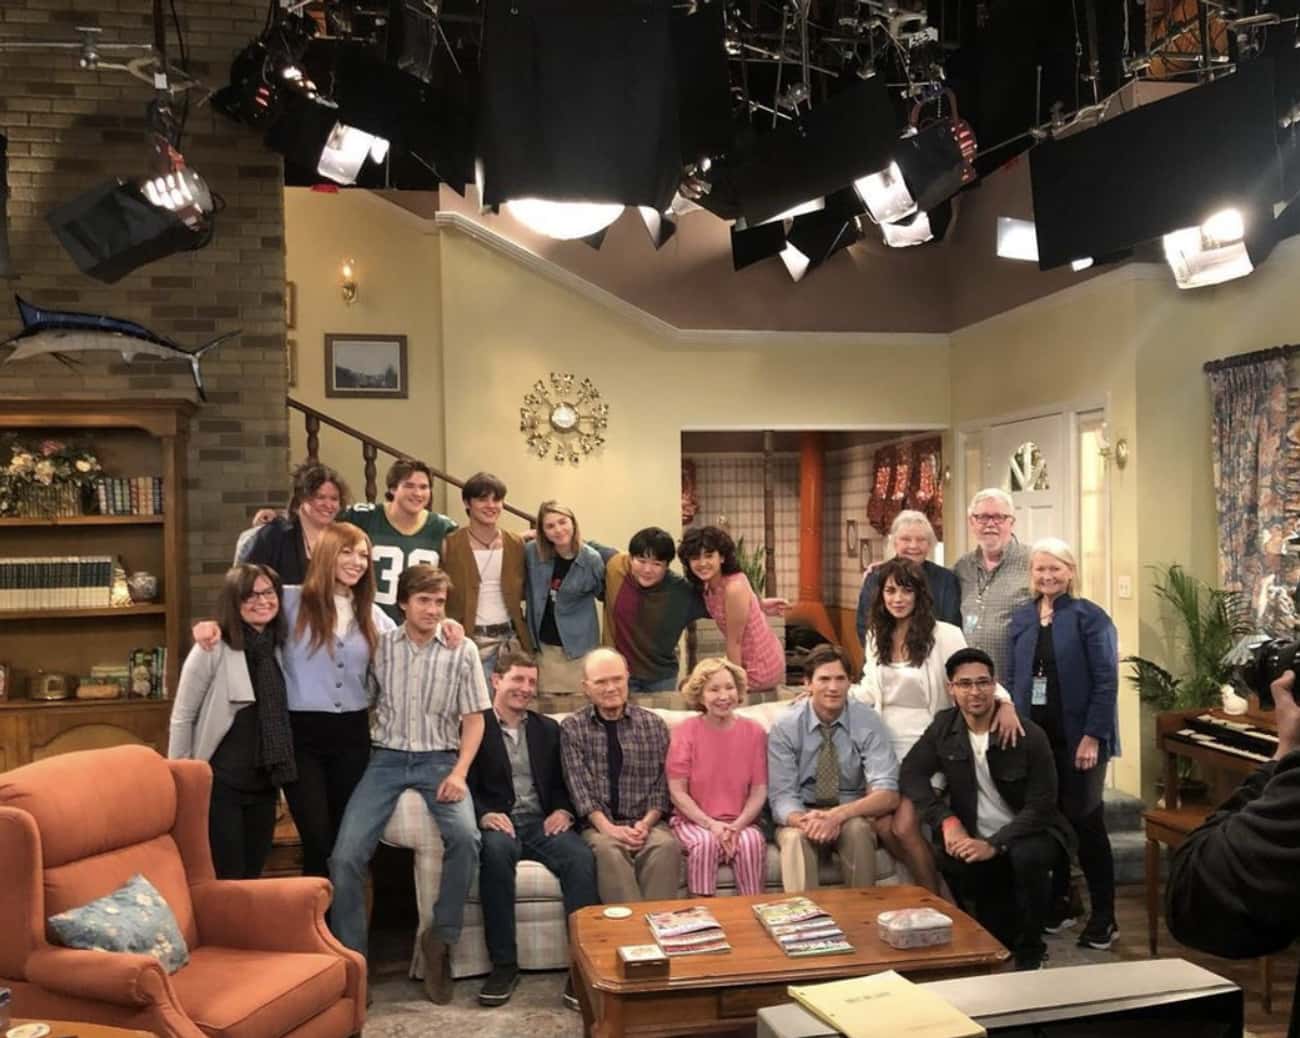 Full Cast Photo In The Formans' Living Room